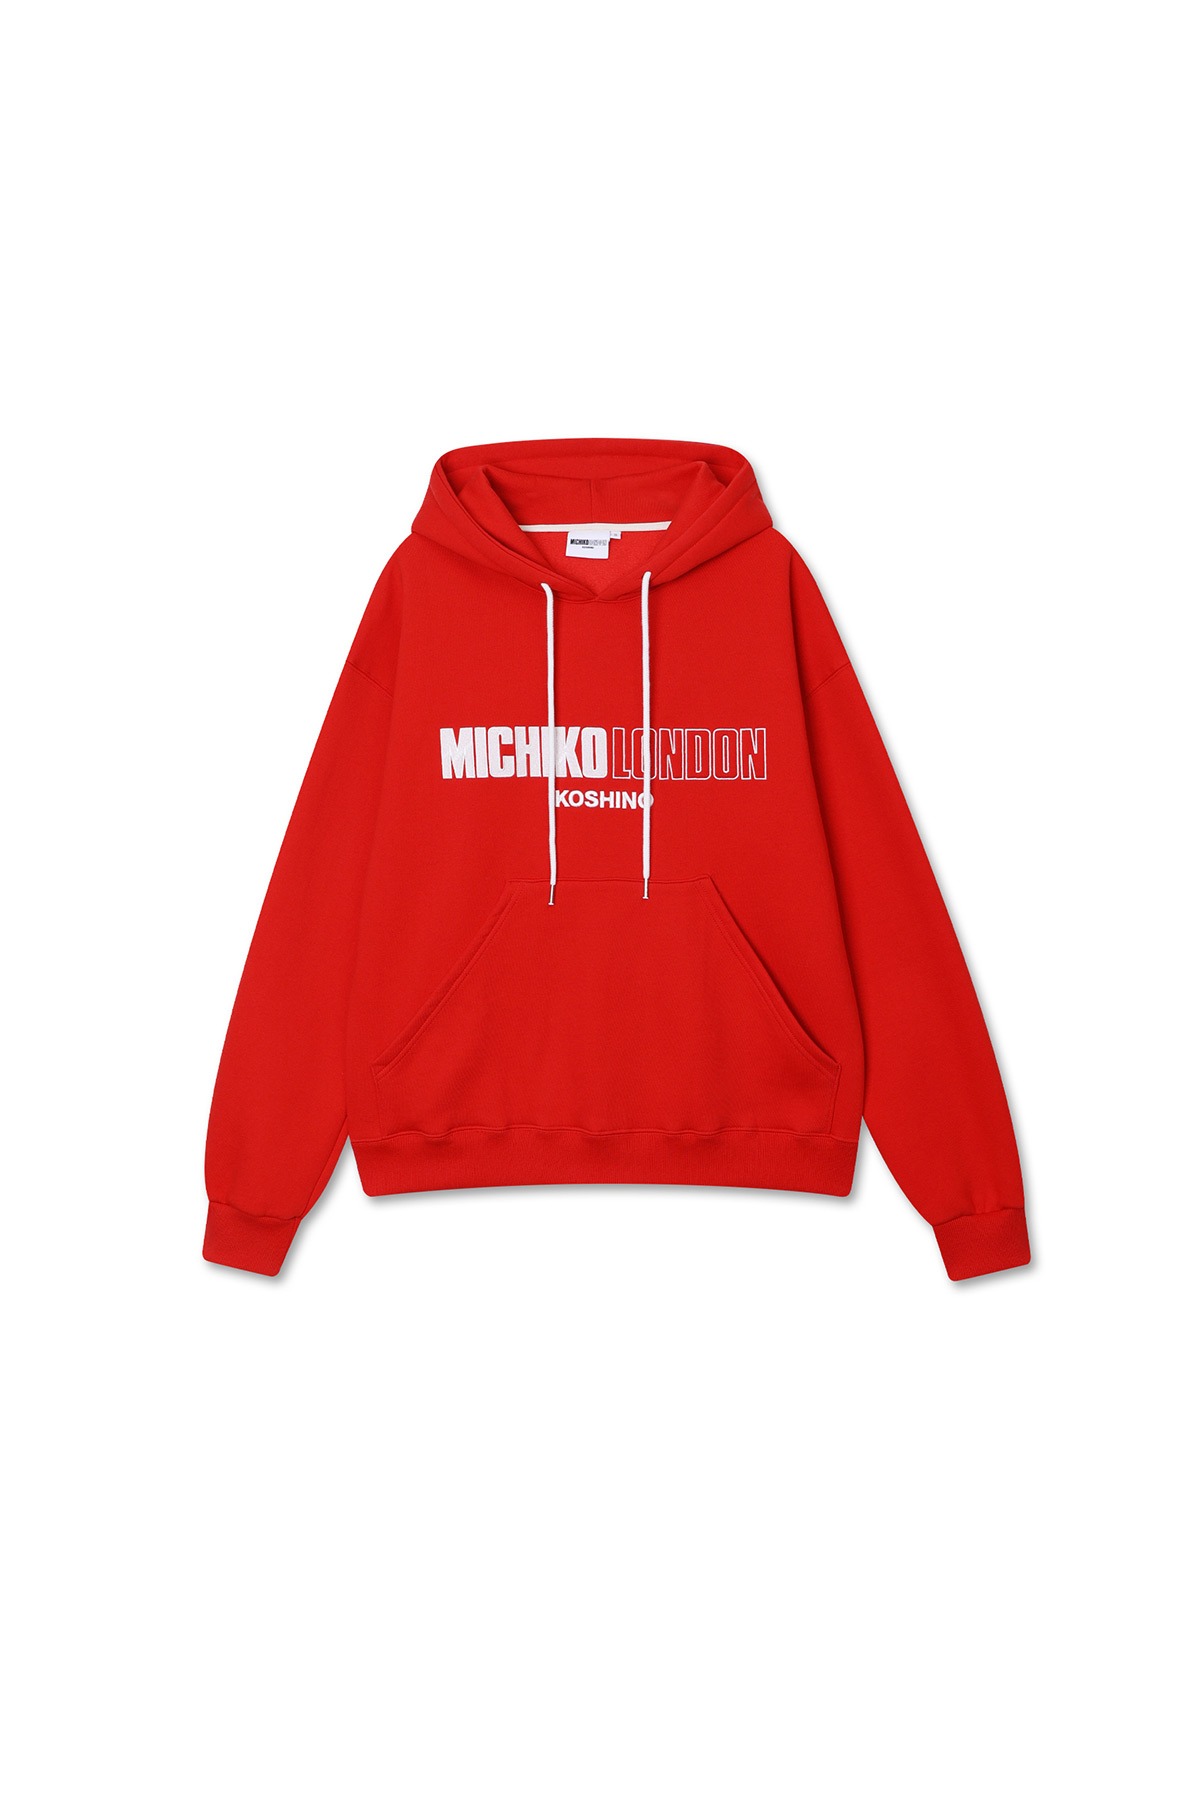 SIGNATURE LOGO NAPPING HOODY RED_UNISEX